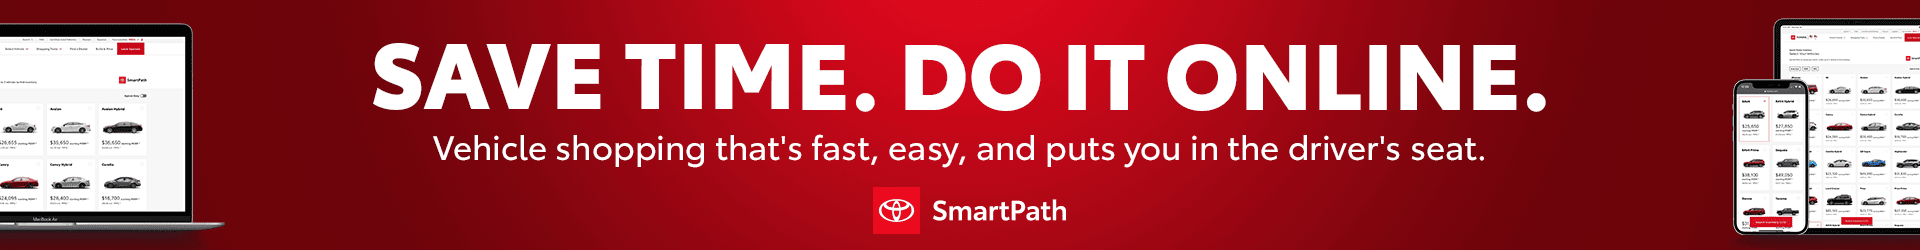 Save Time. Do it Online. SmartPath